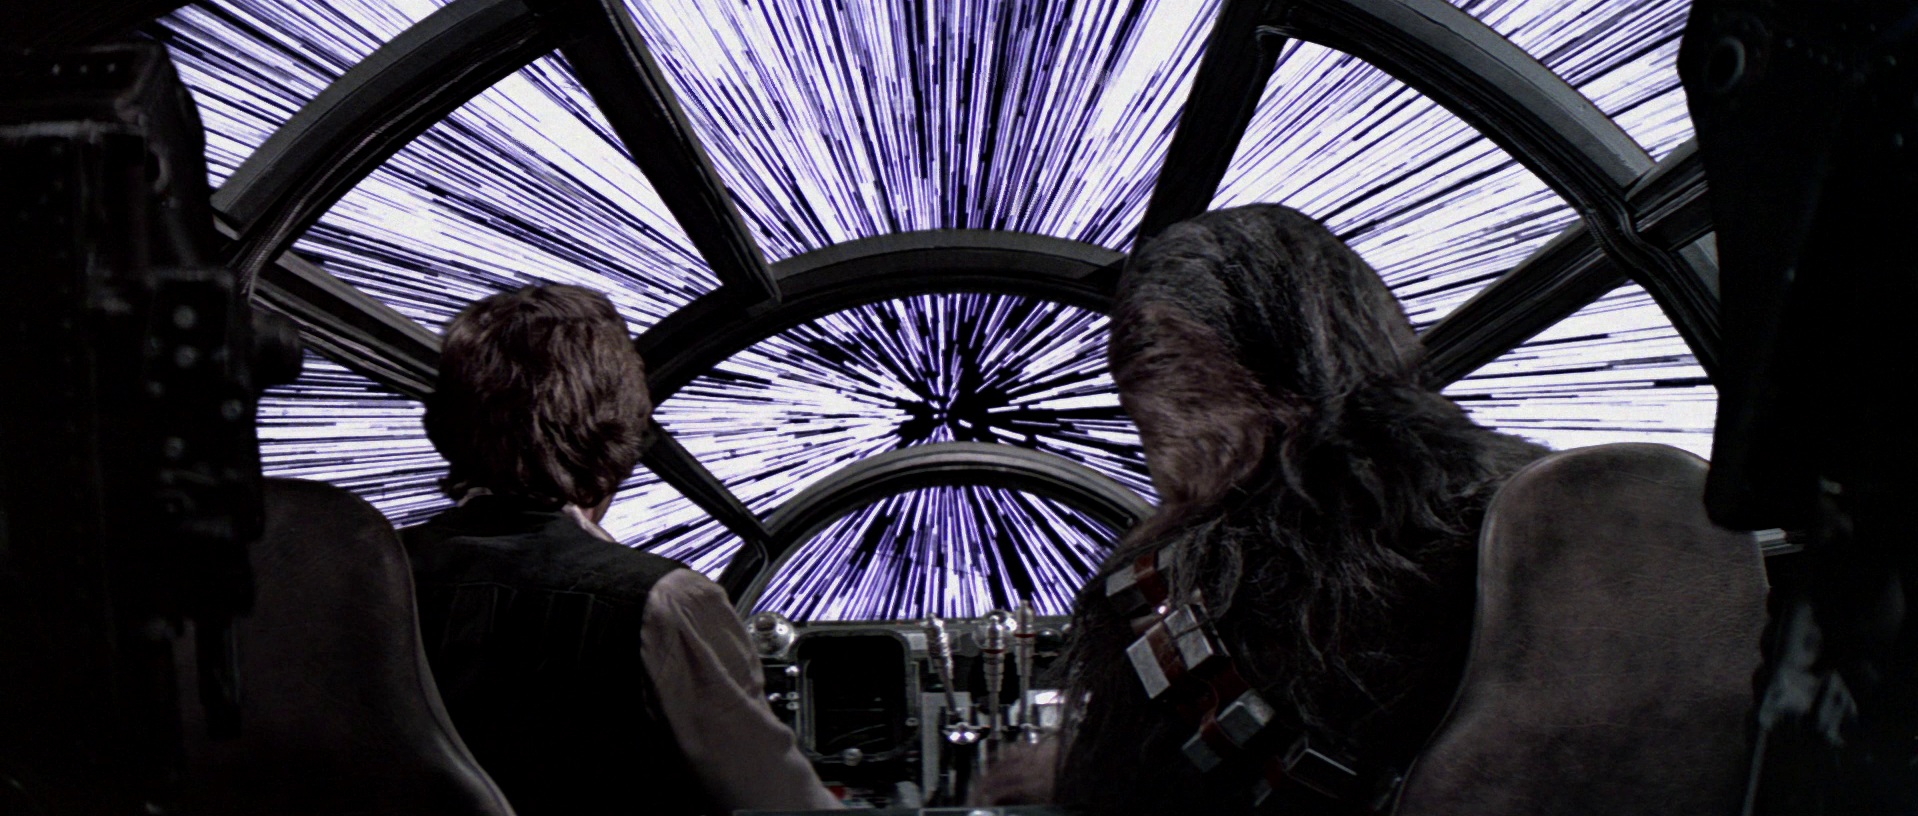 https://static.wikia.nocookie.net/starwars/images/a/ae/Hyperspace_falcon.png/revision/latest?cb=20130312014242